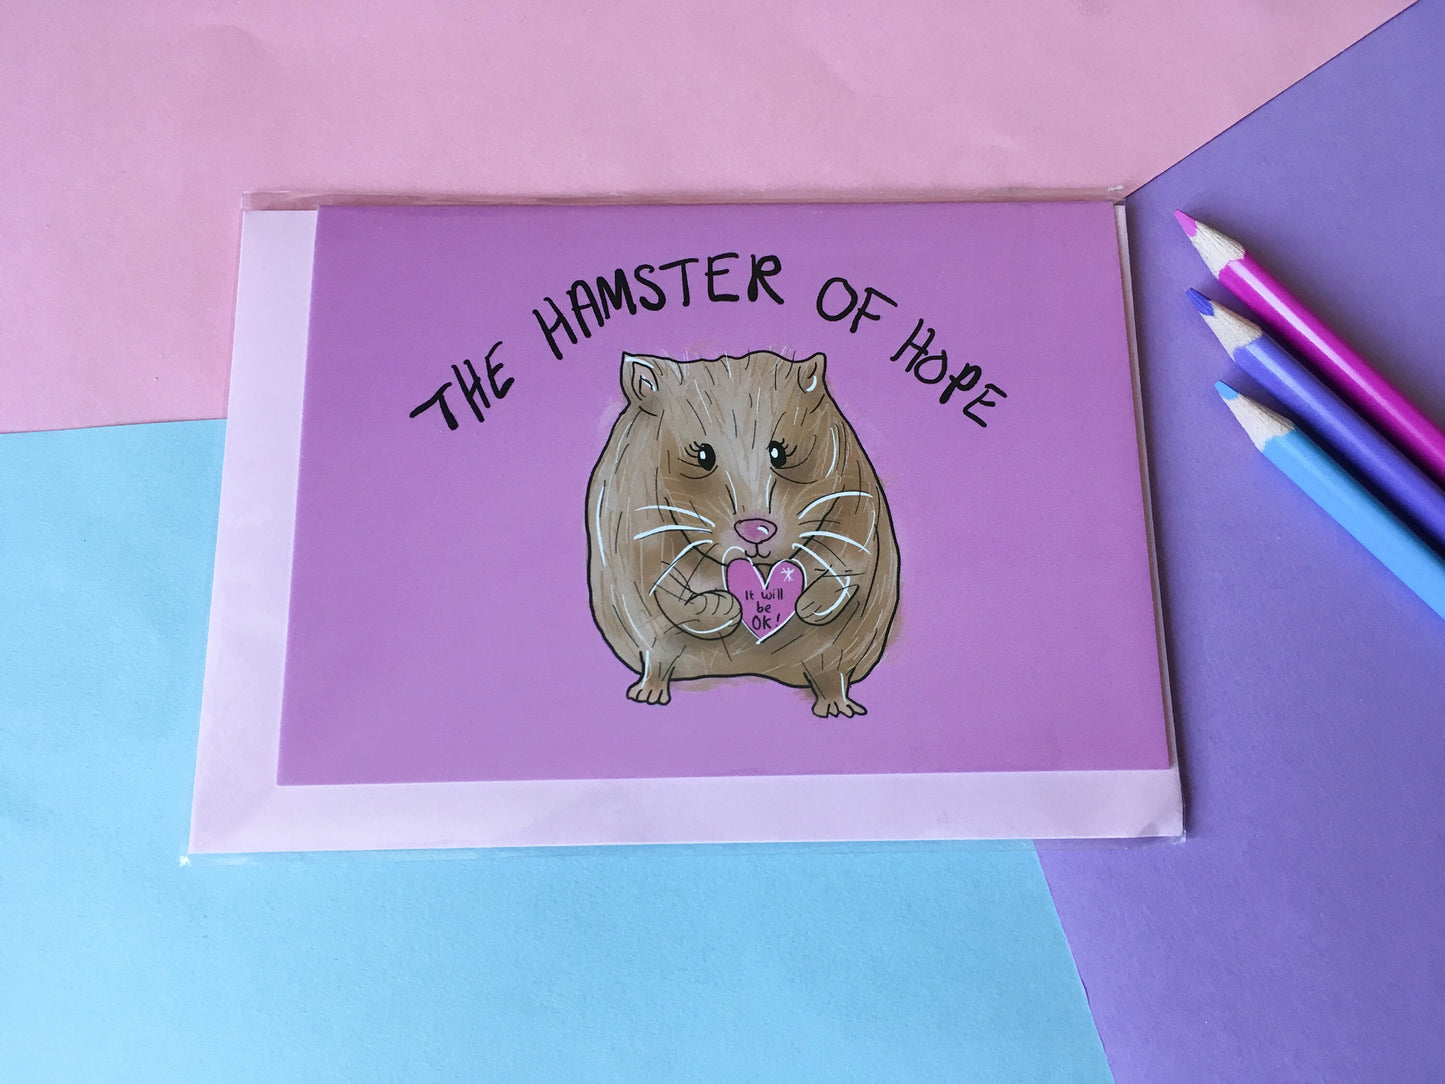 The Hamster of Hope, A6 Motivational Greeting Card